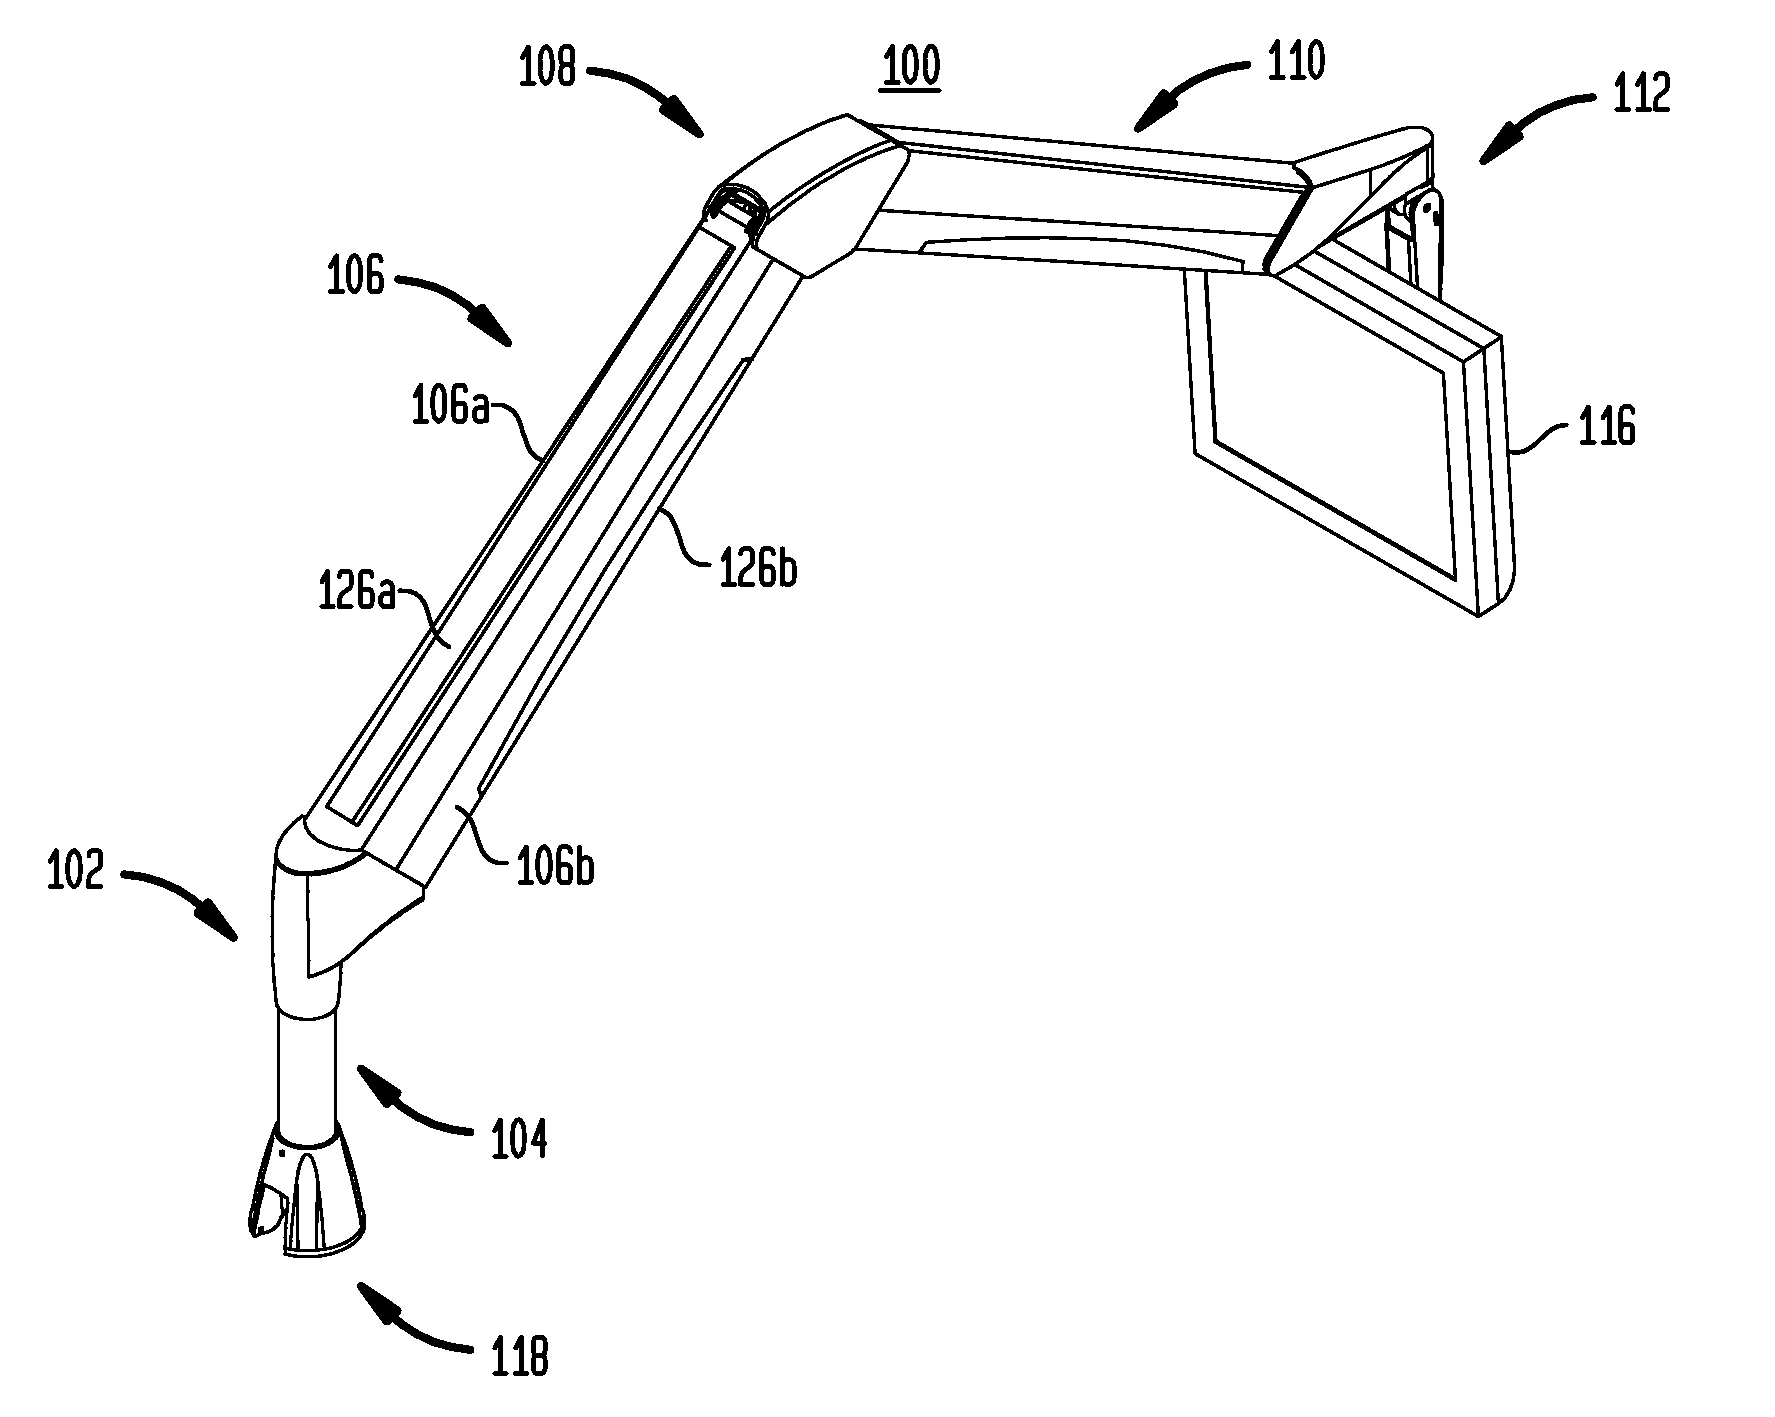 Extension arm with moving clevis and cable management